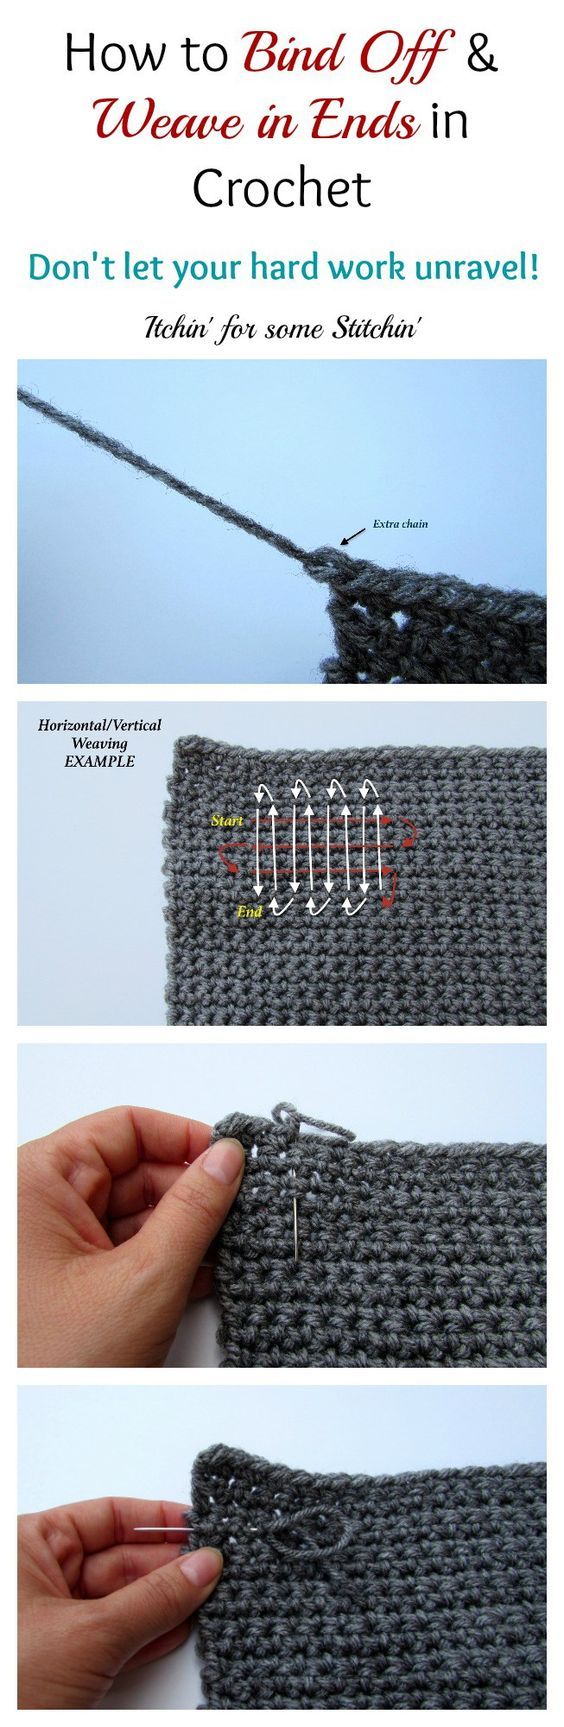 How to Bind Off and Weave in Ends in Crochet